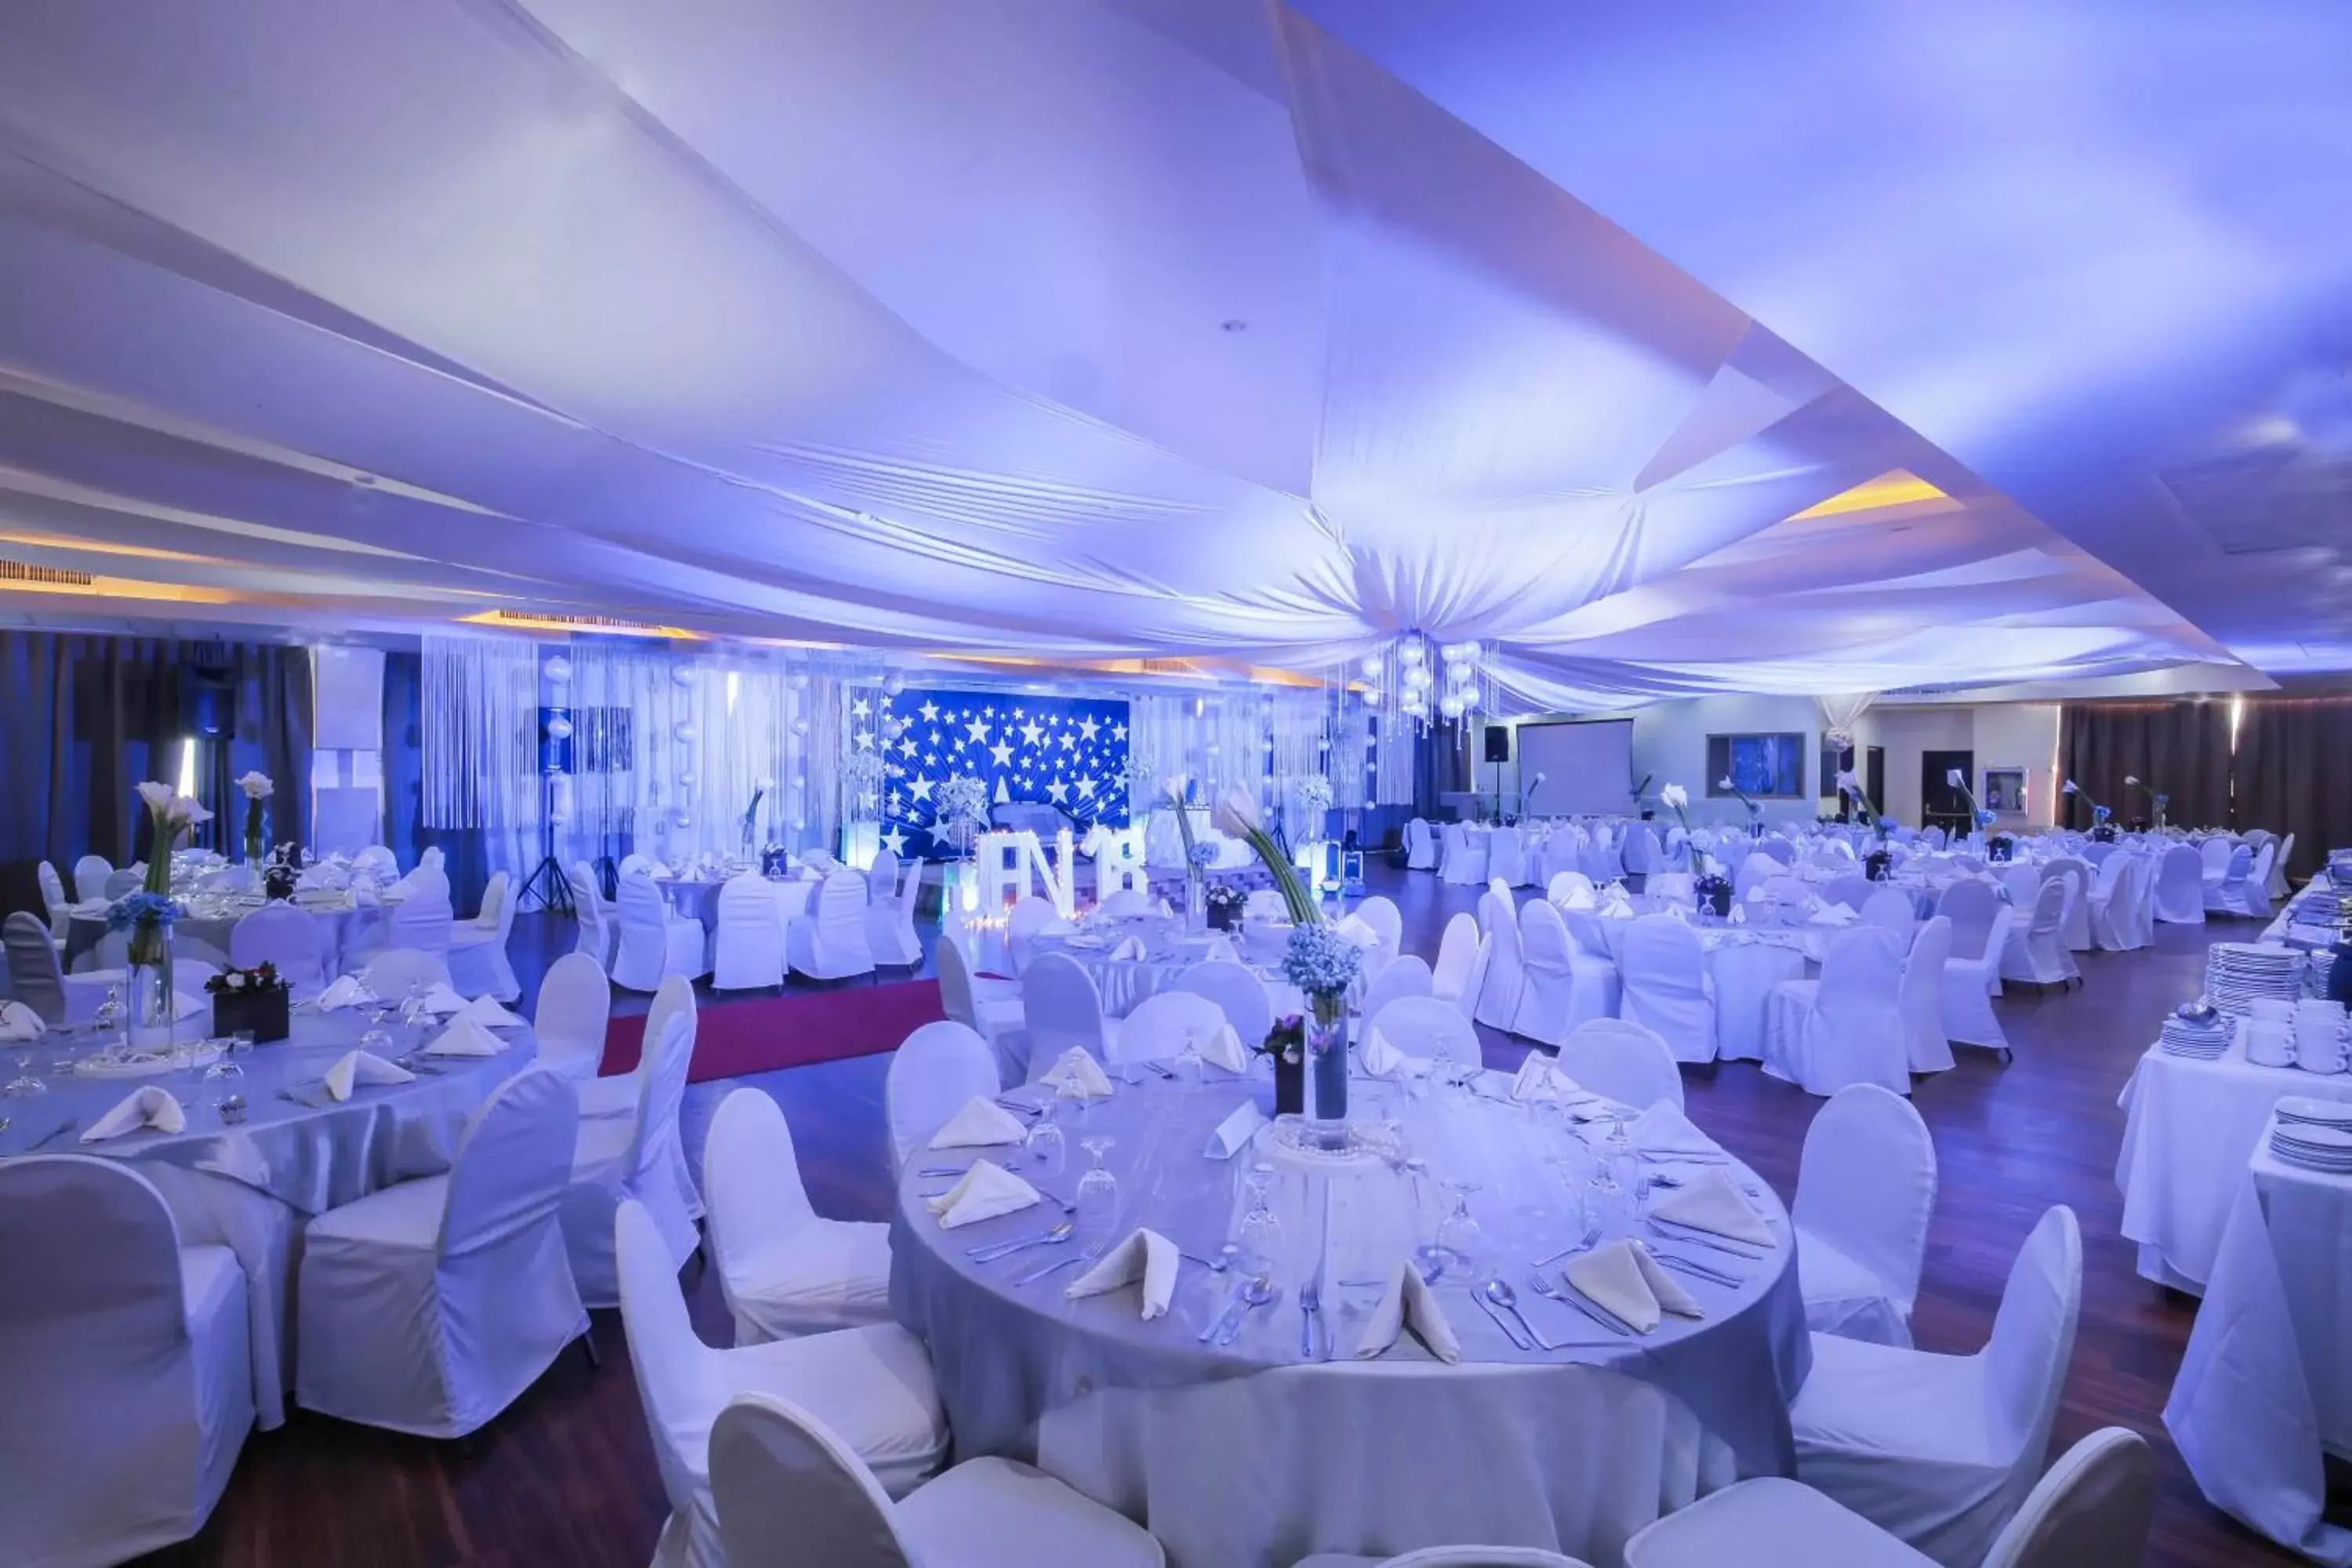 Banquet/Function facilities, Banquet Facilities in The Apo View Hotel